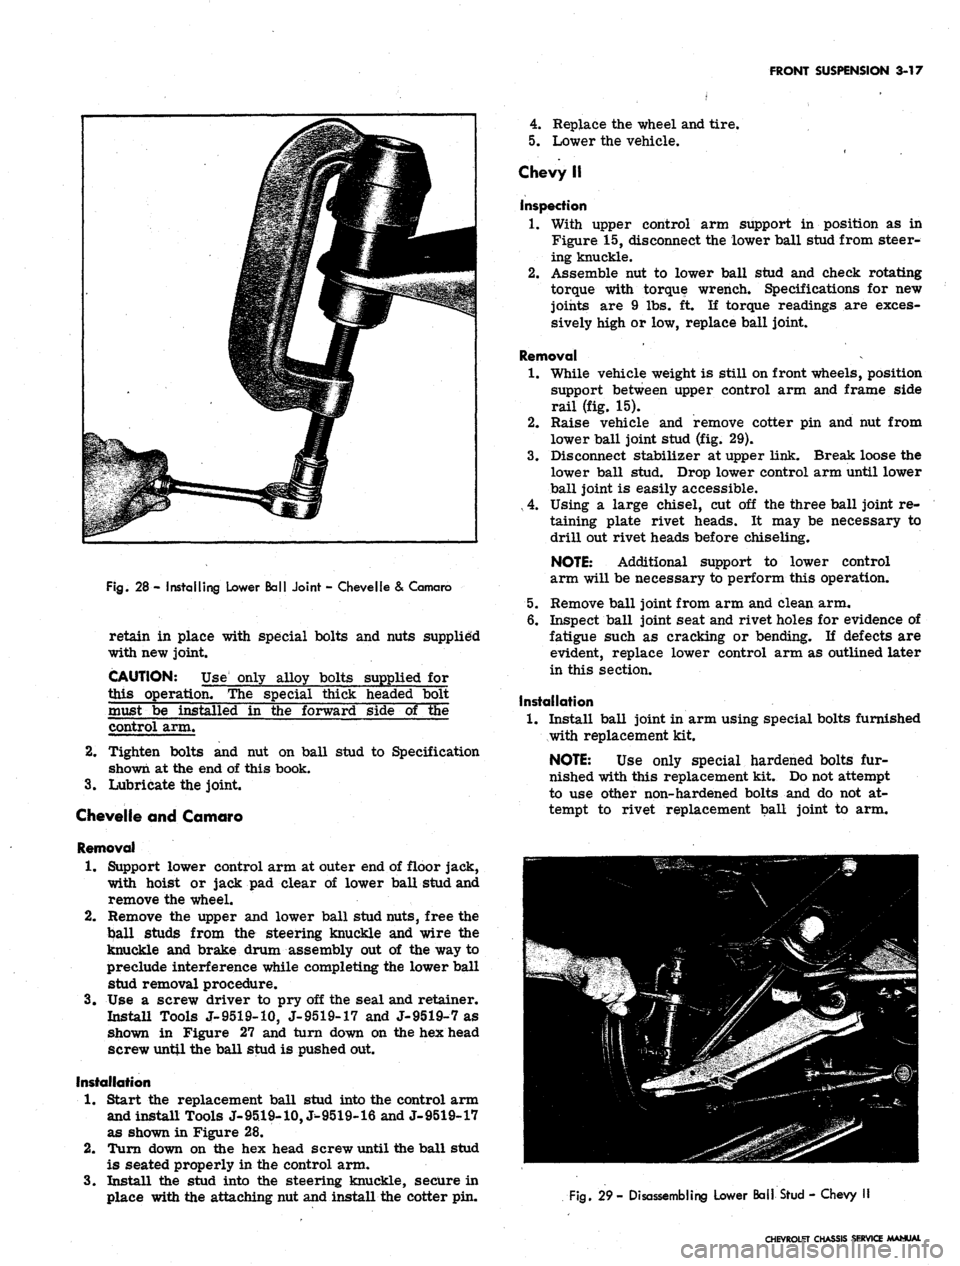 CHEVROLET CAMARO 1967 1.G Chassis Owners Manual 
FRONT SUSPENSION 3-17

4.
 Replace the wheel and tire.

5.
 Lower the vehicle.

Chevy II

inspection

Fig.
 28 - Installing Lower Ball Joint - Chevelle & Camaro

retain in place with special bolts an